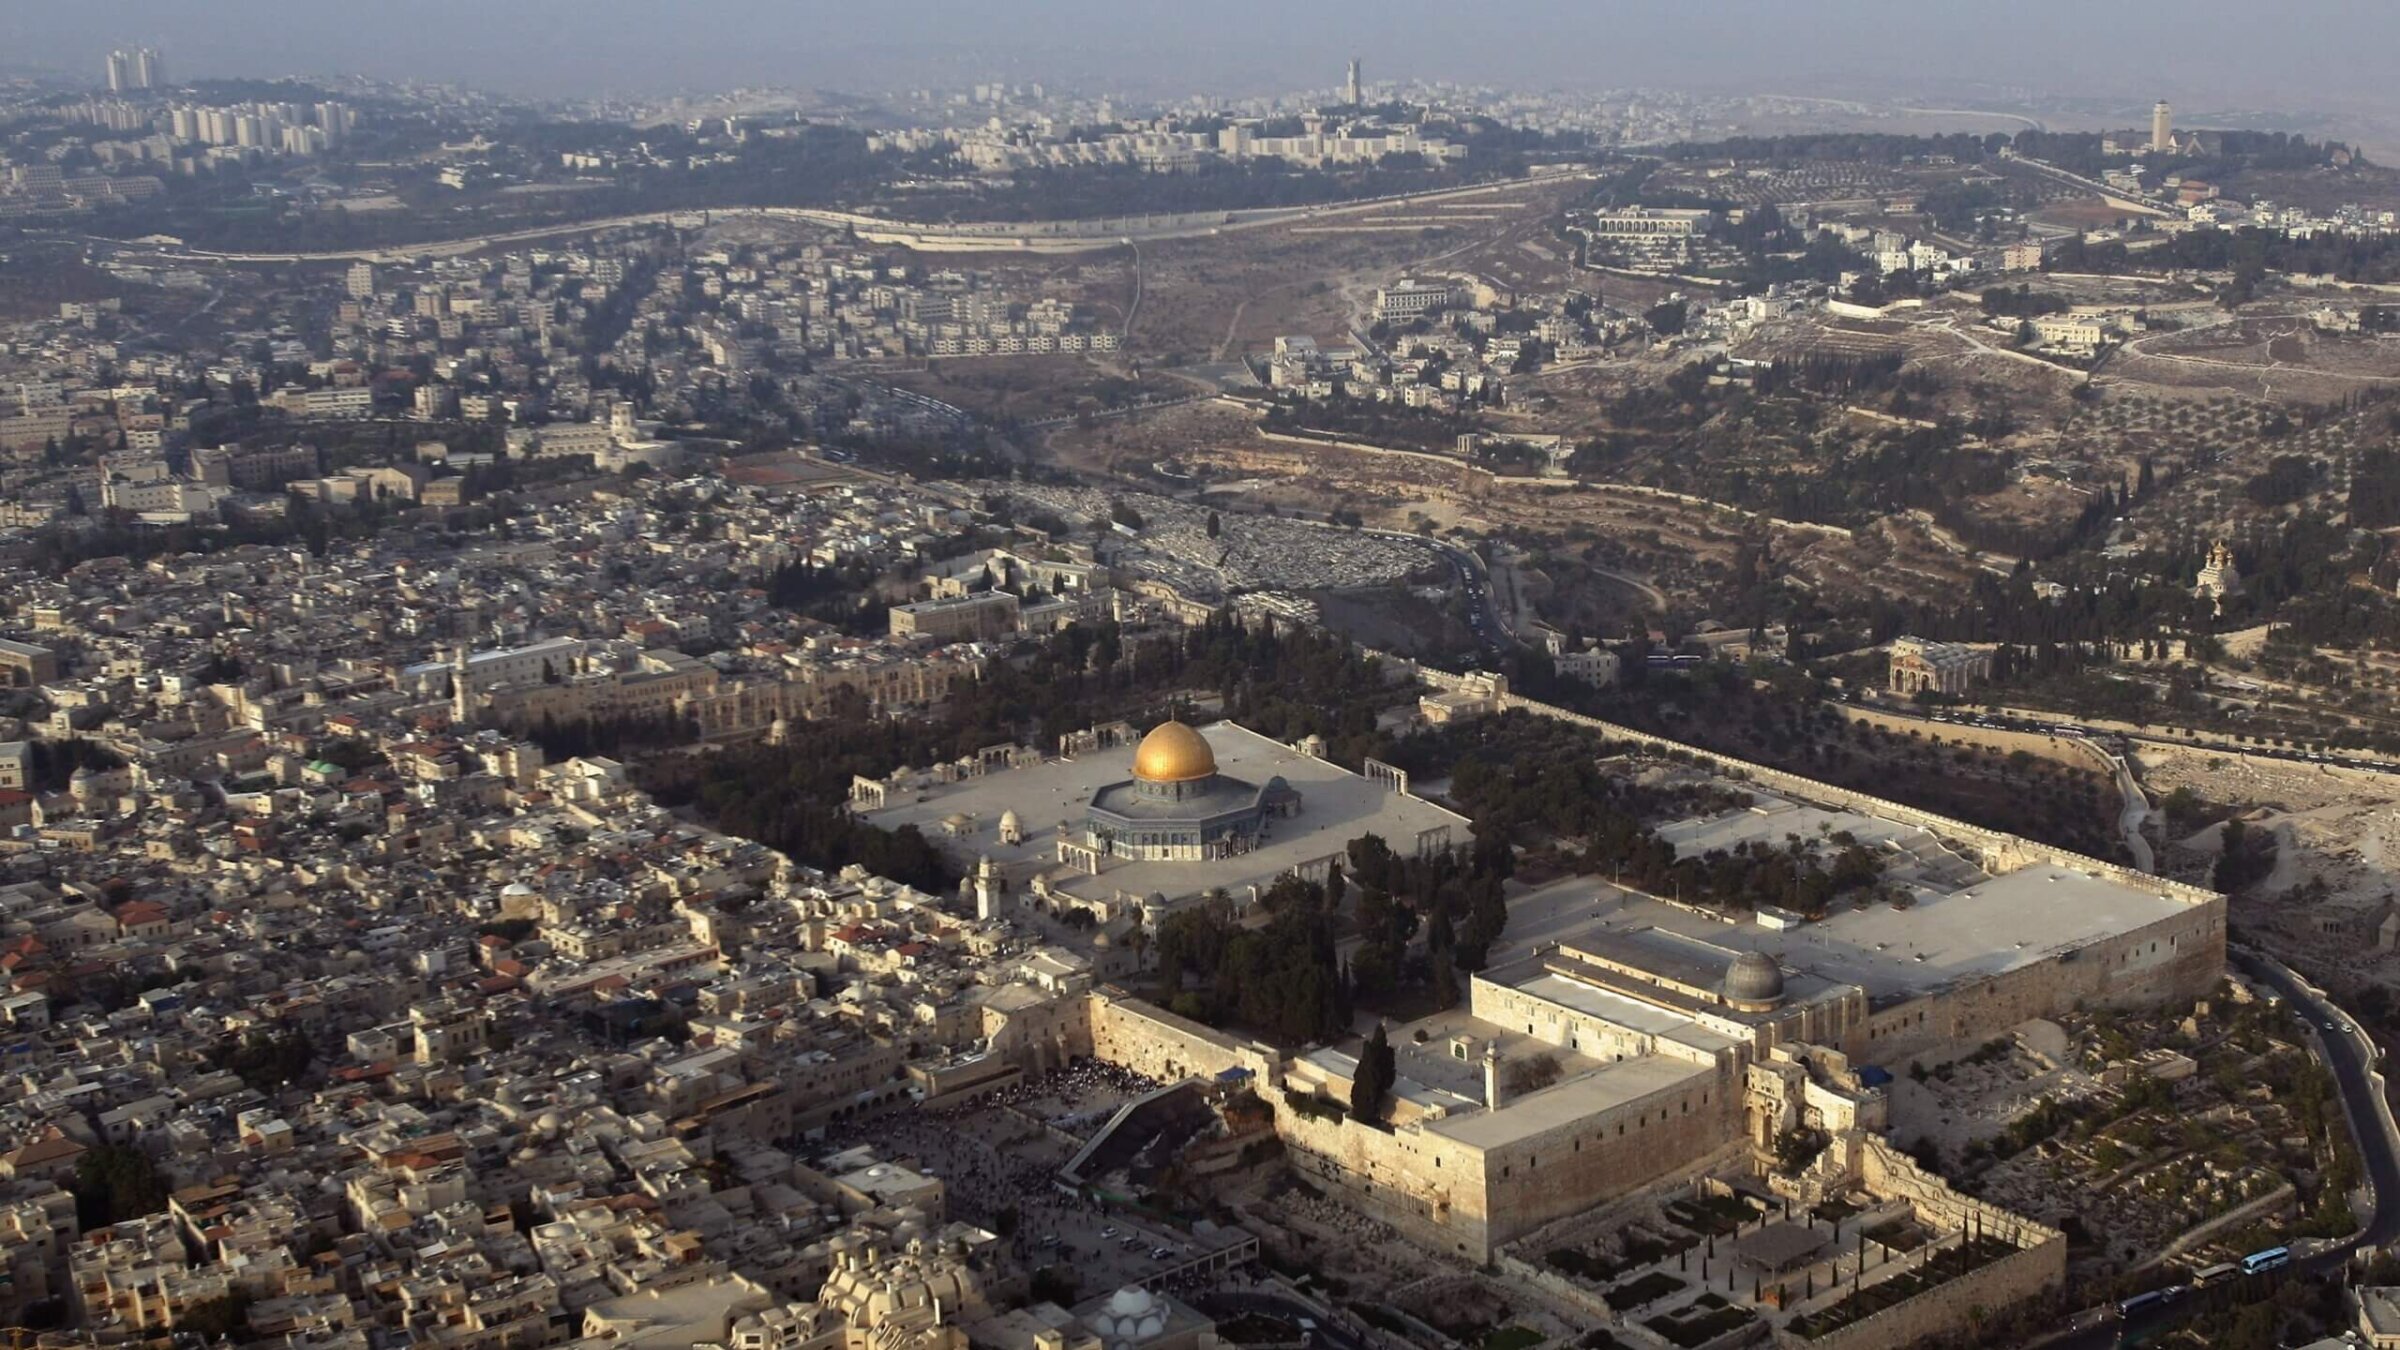 Aerial view of the Old City of Jerusalem, Oct. 2, 2007.